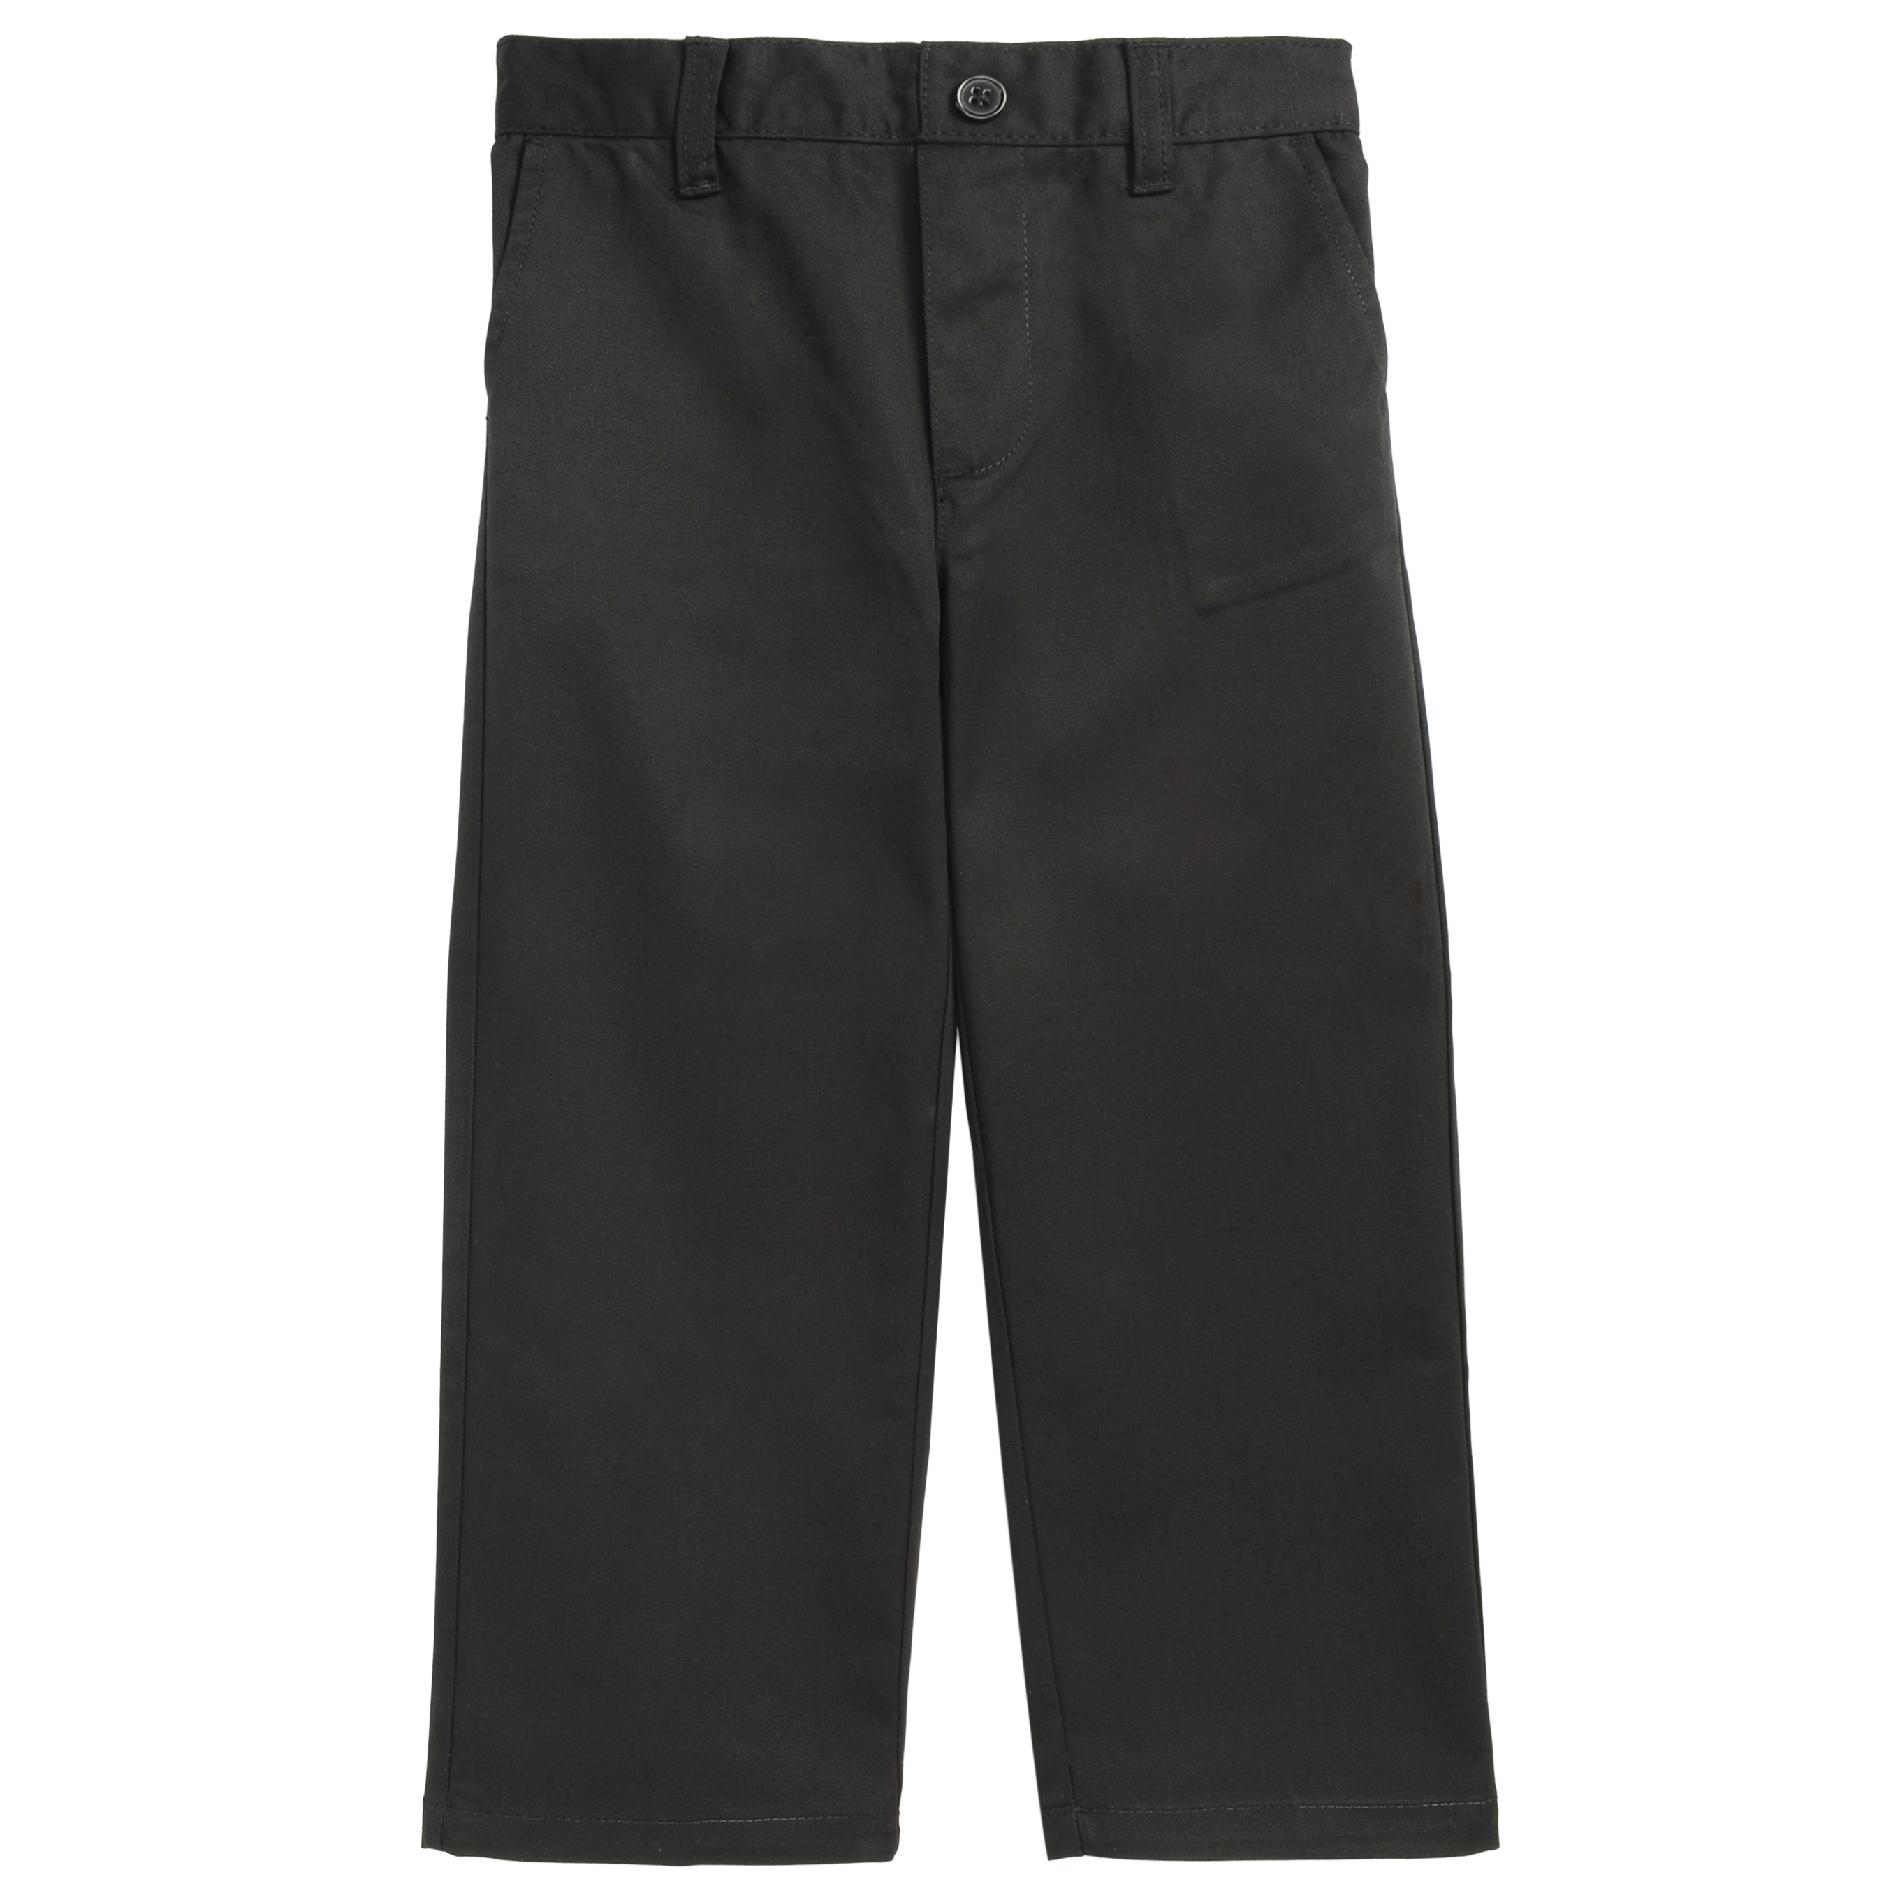 Toddler Boys Pull-On Pant